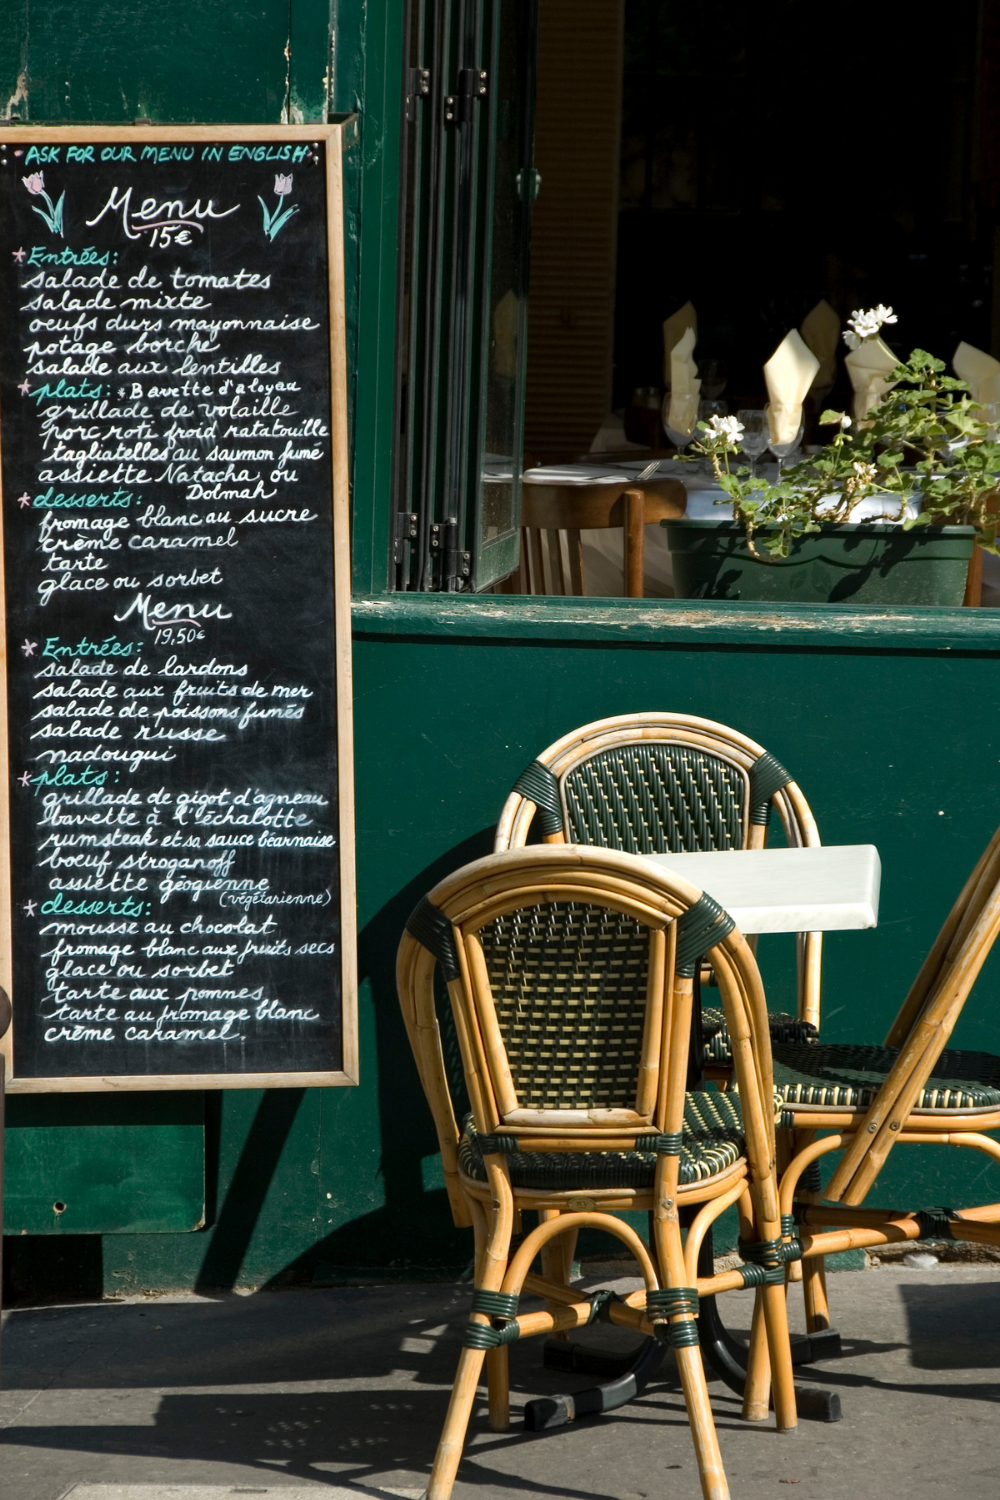 French restaurant etiquette for tourists